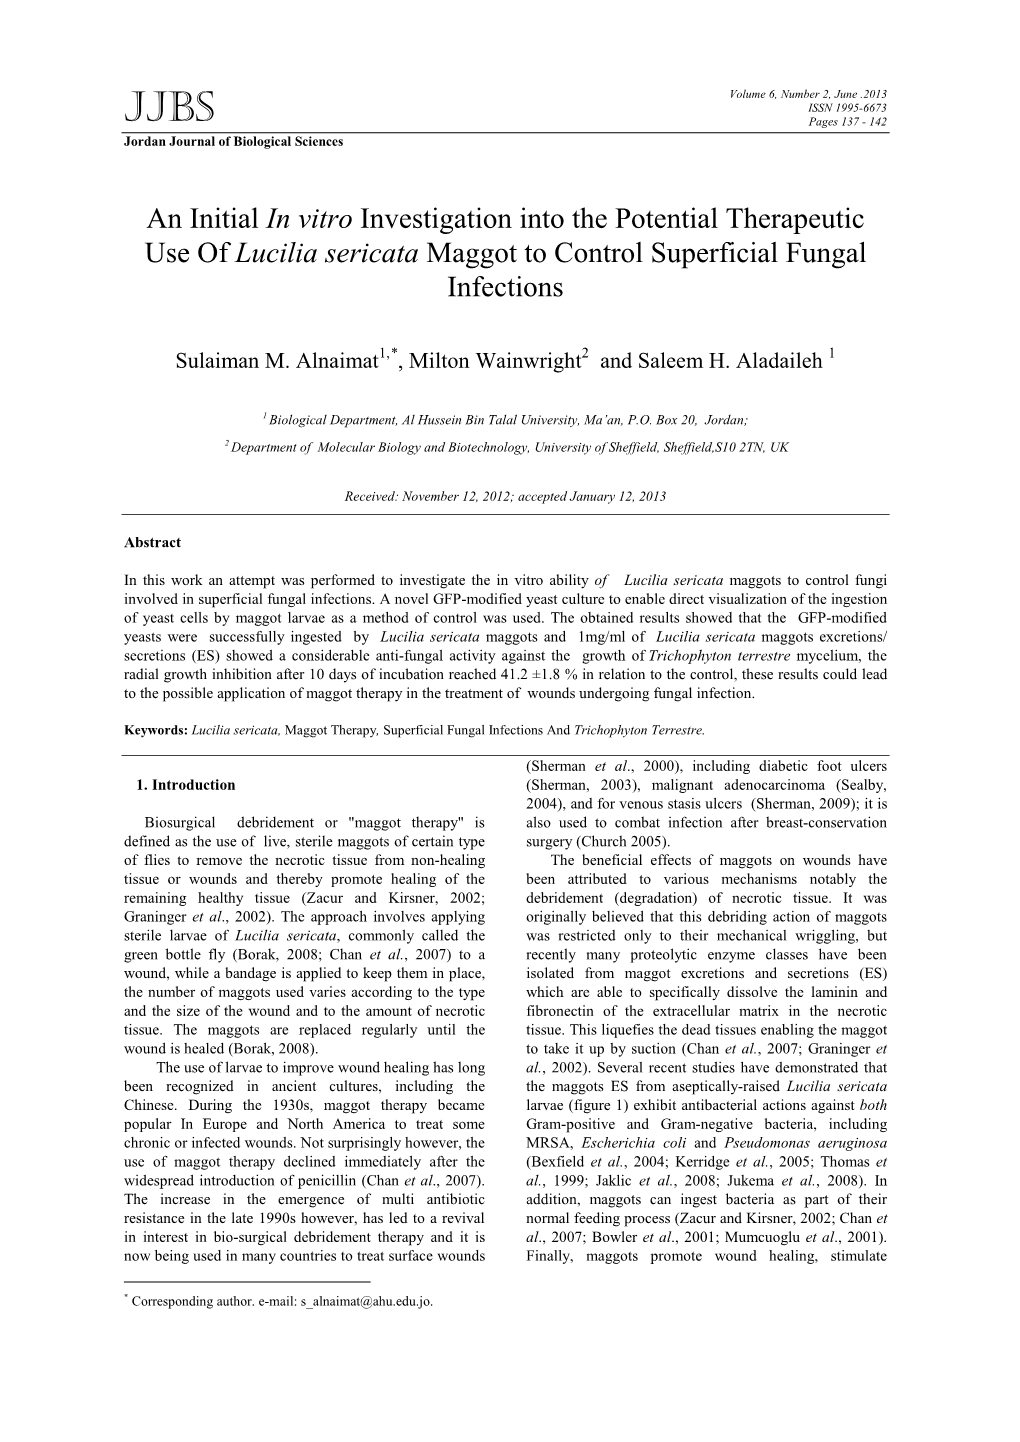 An Initial in Vitro Investigation Into the Potential Therapeutic Use of Lucilia Sericata Maggot to Control Superficial Fungal Infections